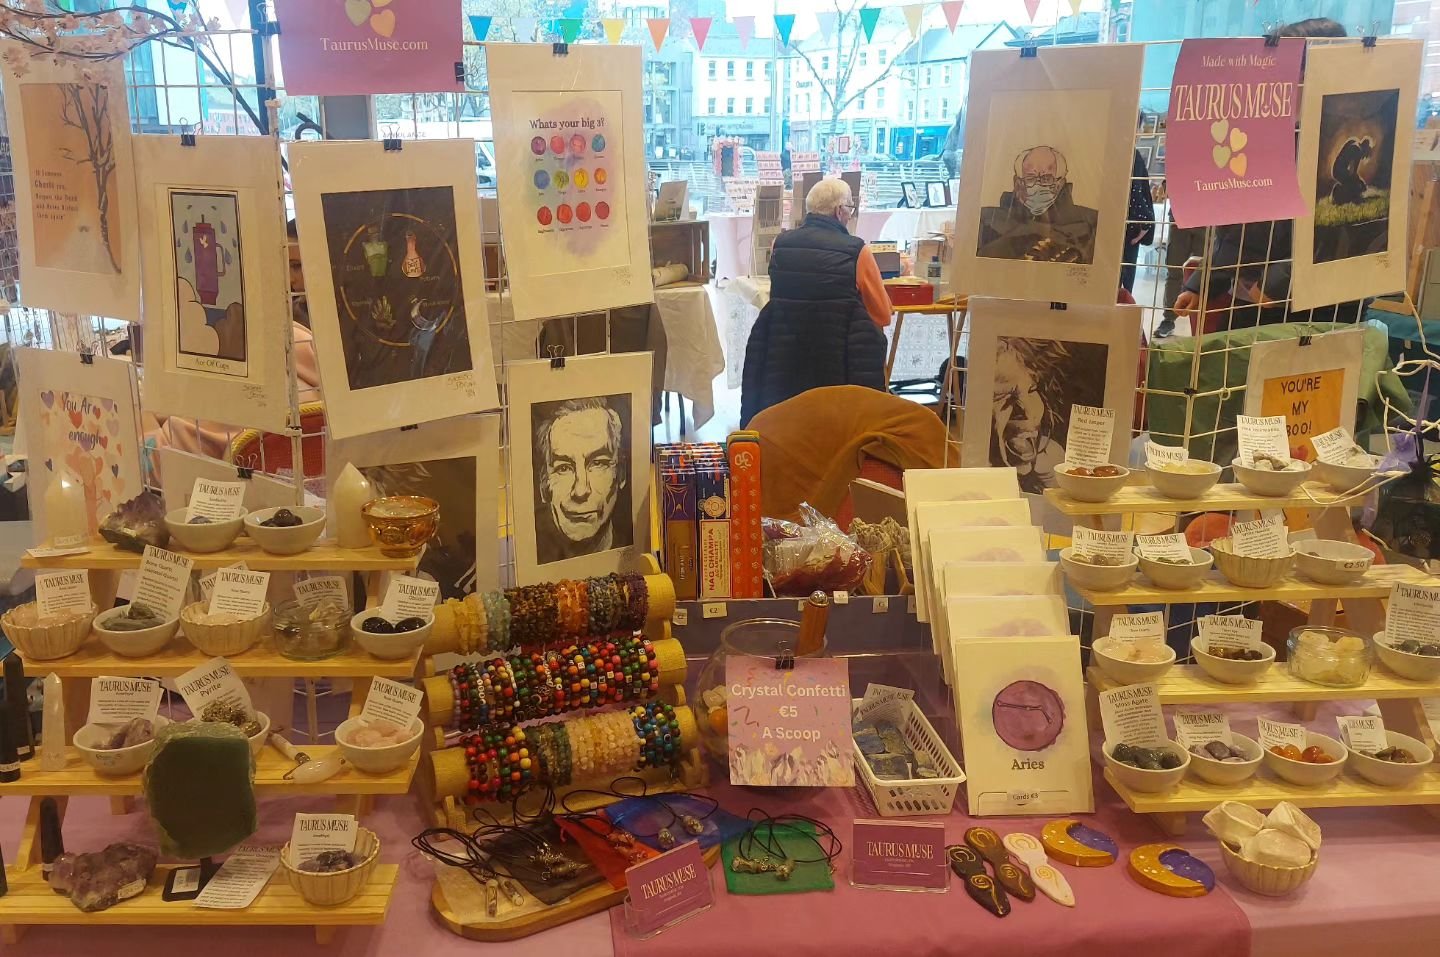 We are here at the @cottagemarketdrogheda for the May Bank Holiday market 10-5 pm #smallbusiness #droghedaartsfestival #witchesofinstagram